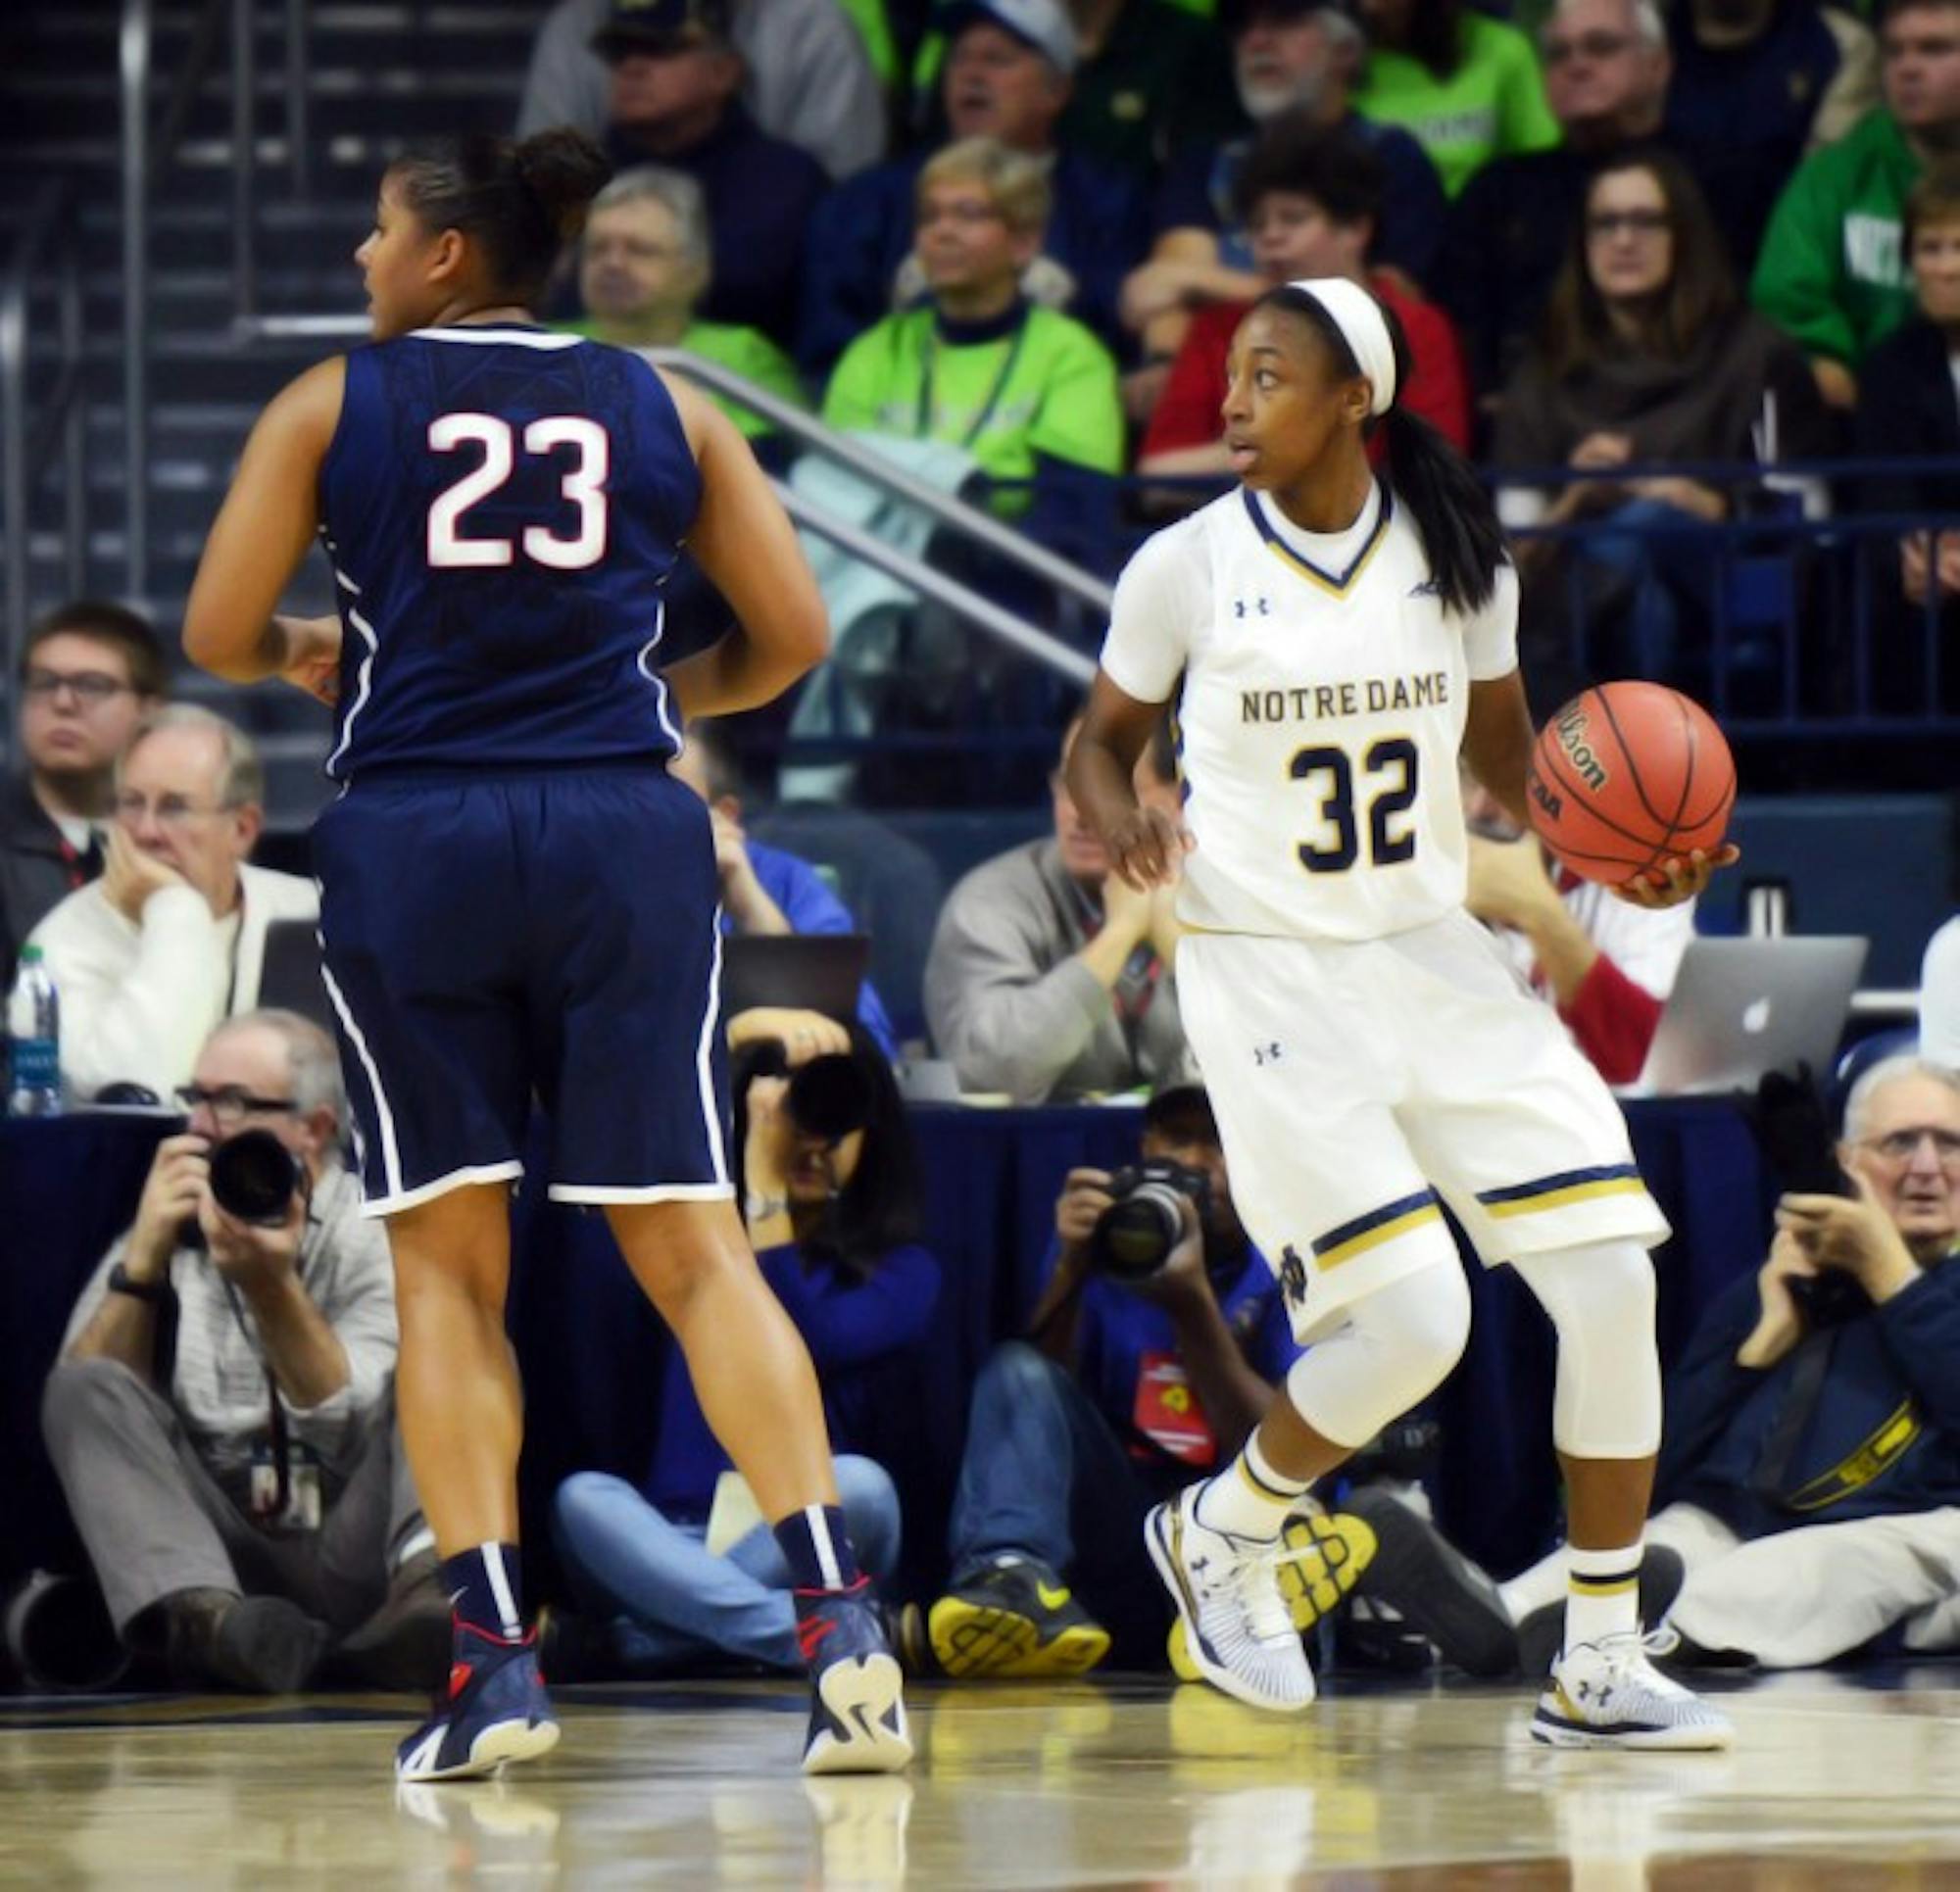 Irish junior guard Jewell Loyd looks to the referee after a whistle during Notre Dame’s 74-56 loss to Connecticut on Saturday.